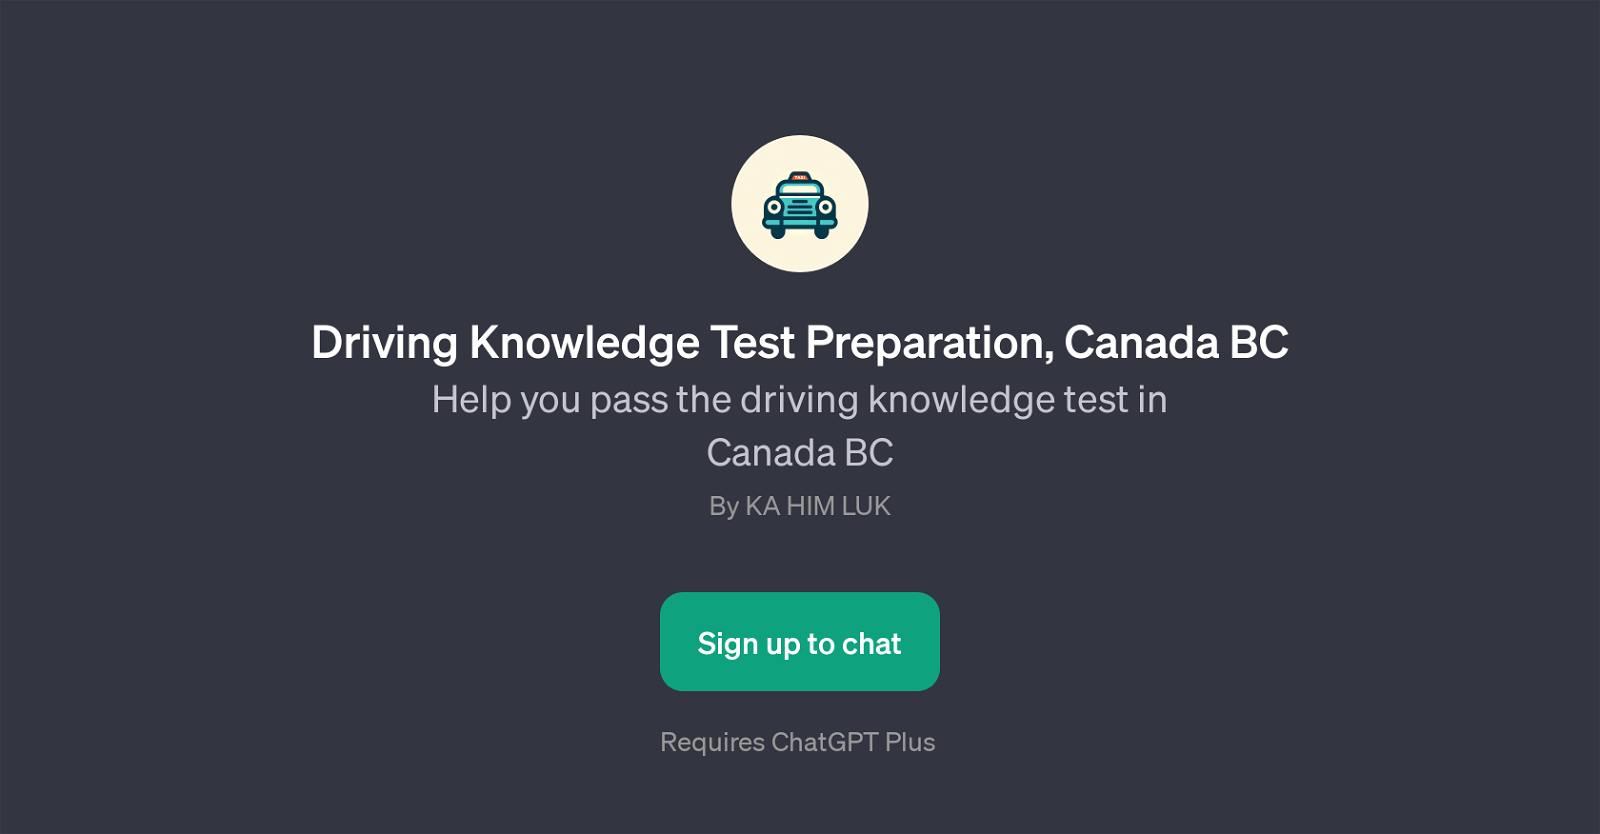 Driving Knowledge Test Preparation, Canada BC website